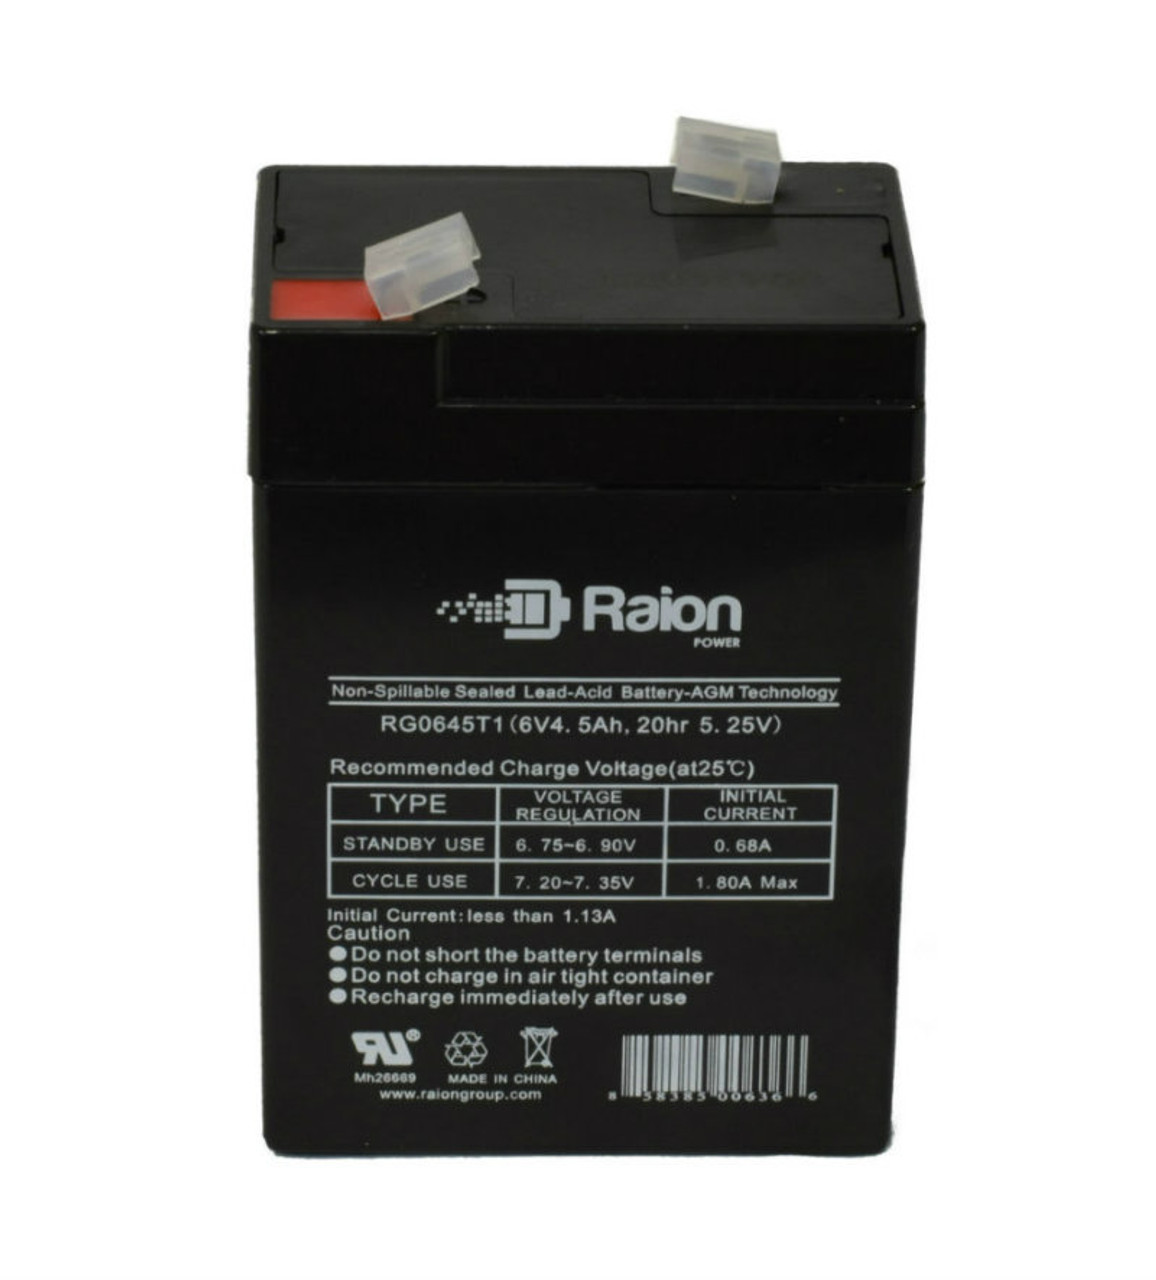 Raion Power RG0645T1 Replacement Battery Cartridge for AJC C4.5S